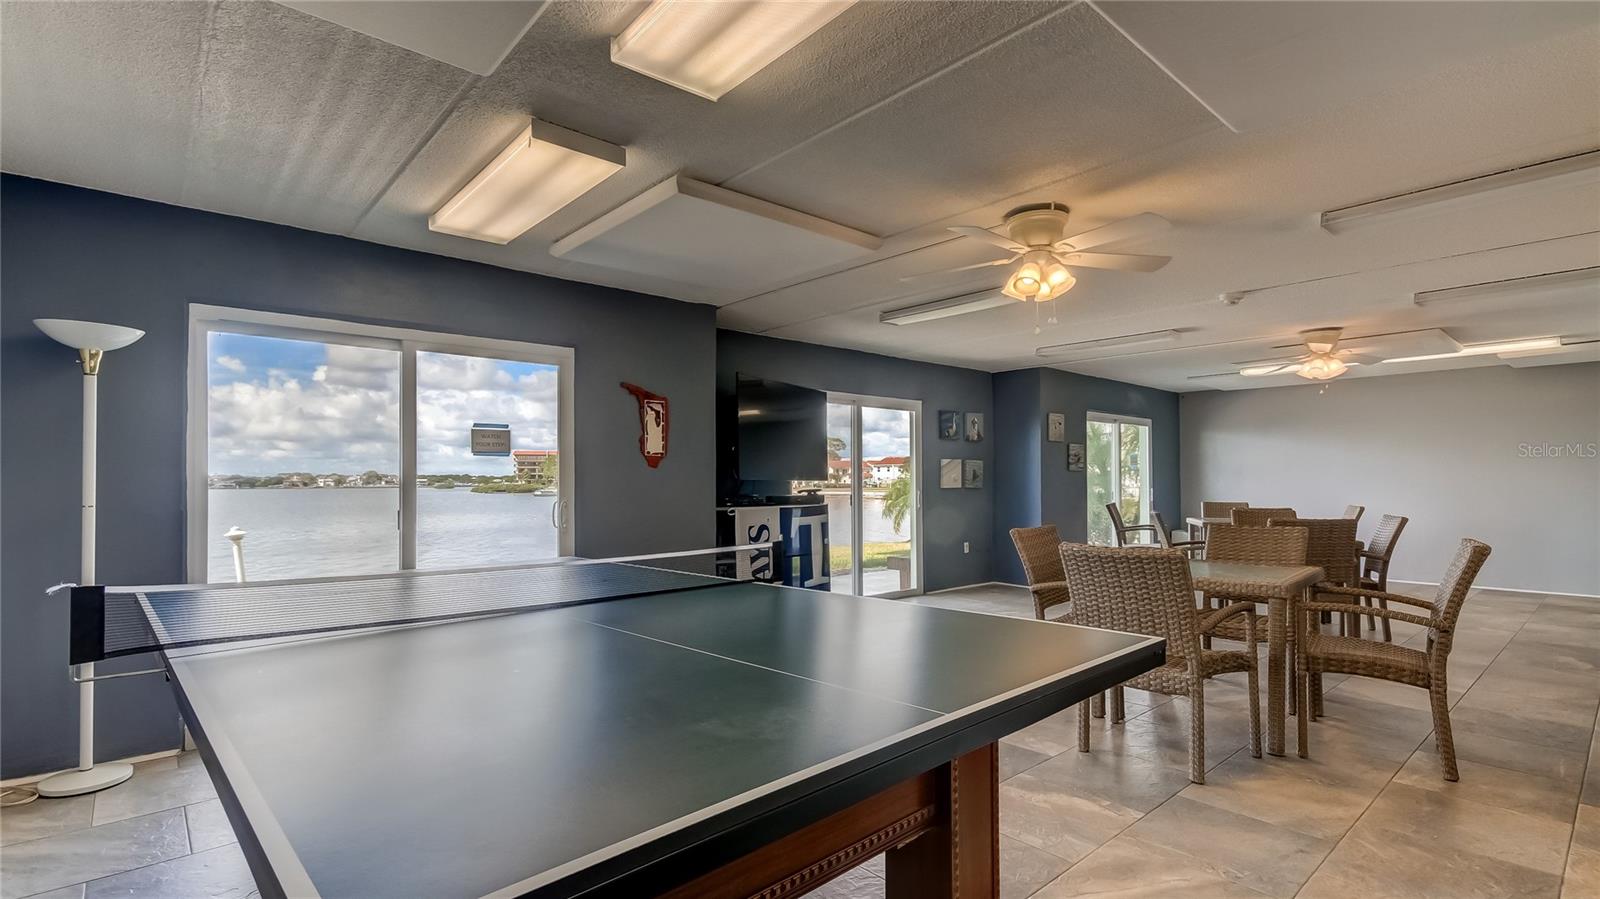 Clubhouse game room & kitchen